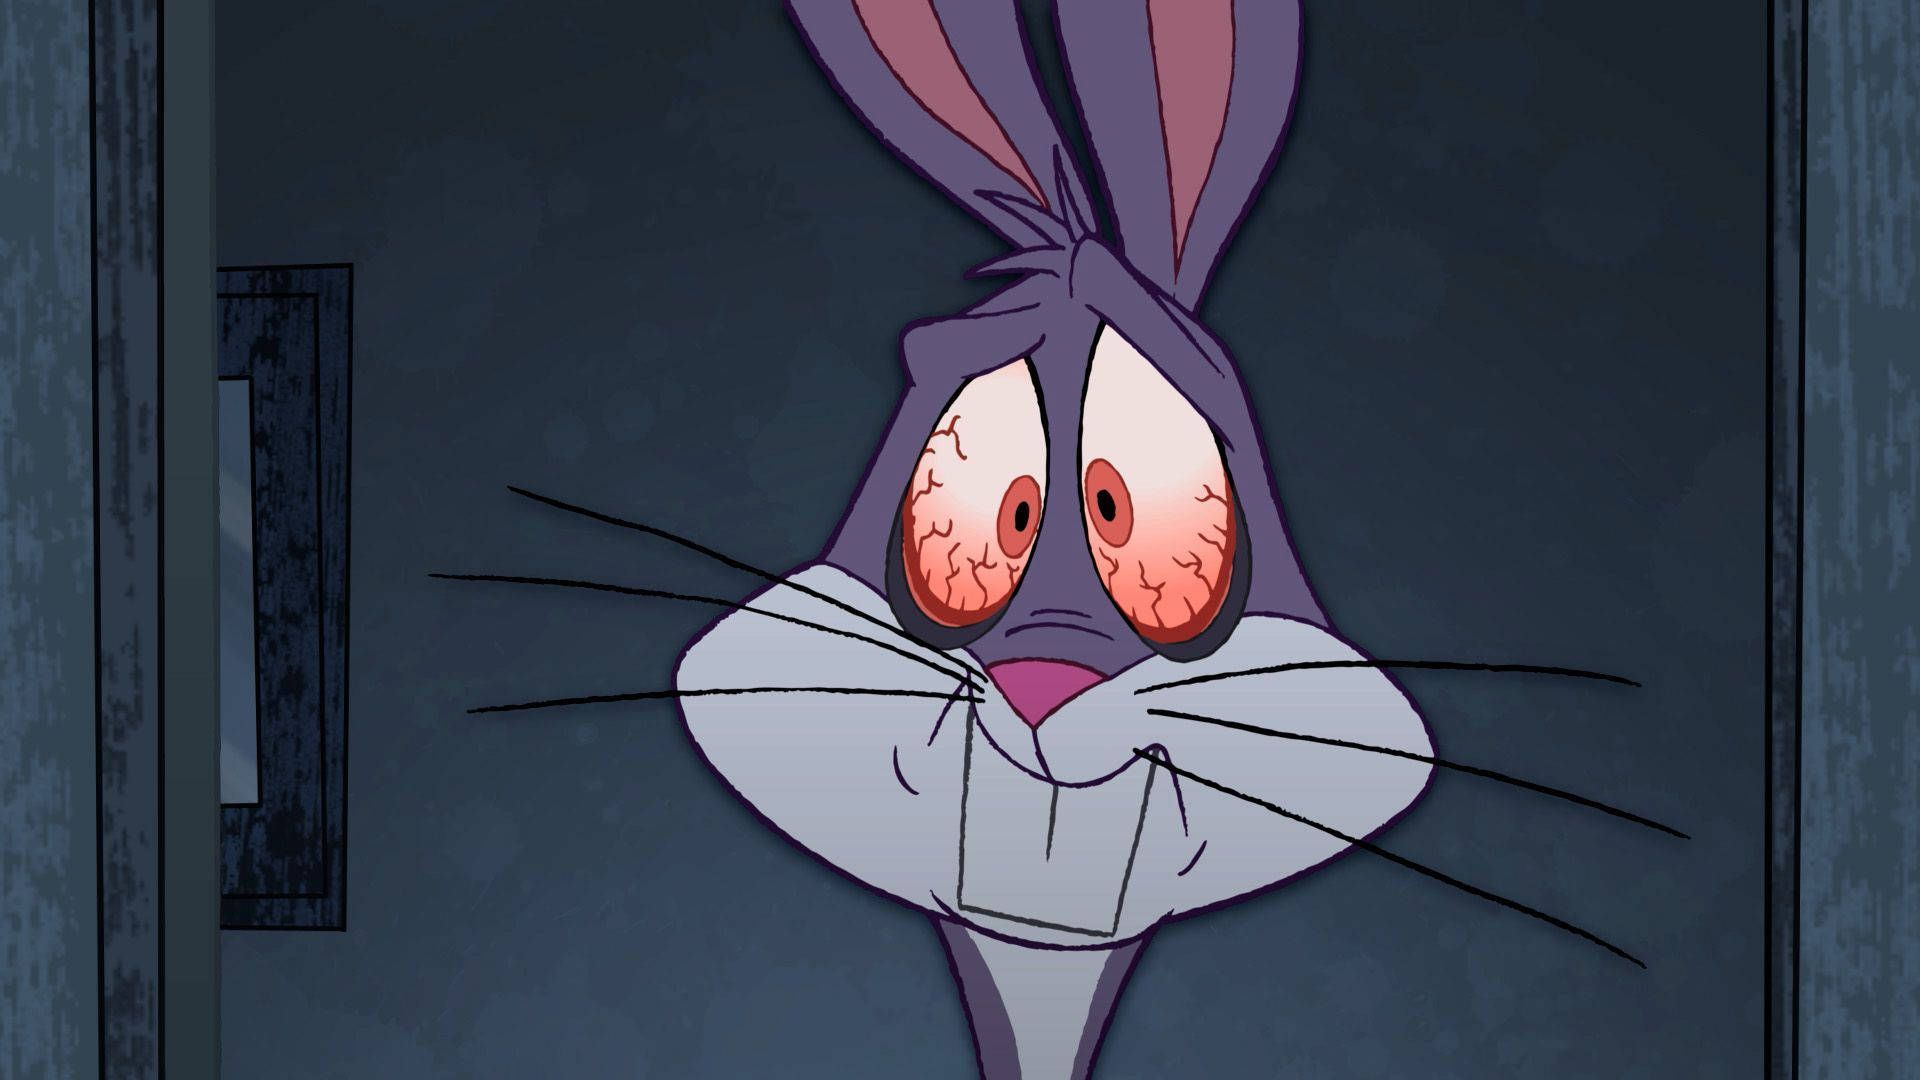 Free Bugs Bunny Wallpaper Downloads, Bugs Bunny Wallpaper for FREE